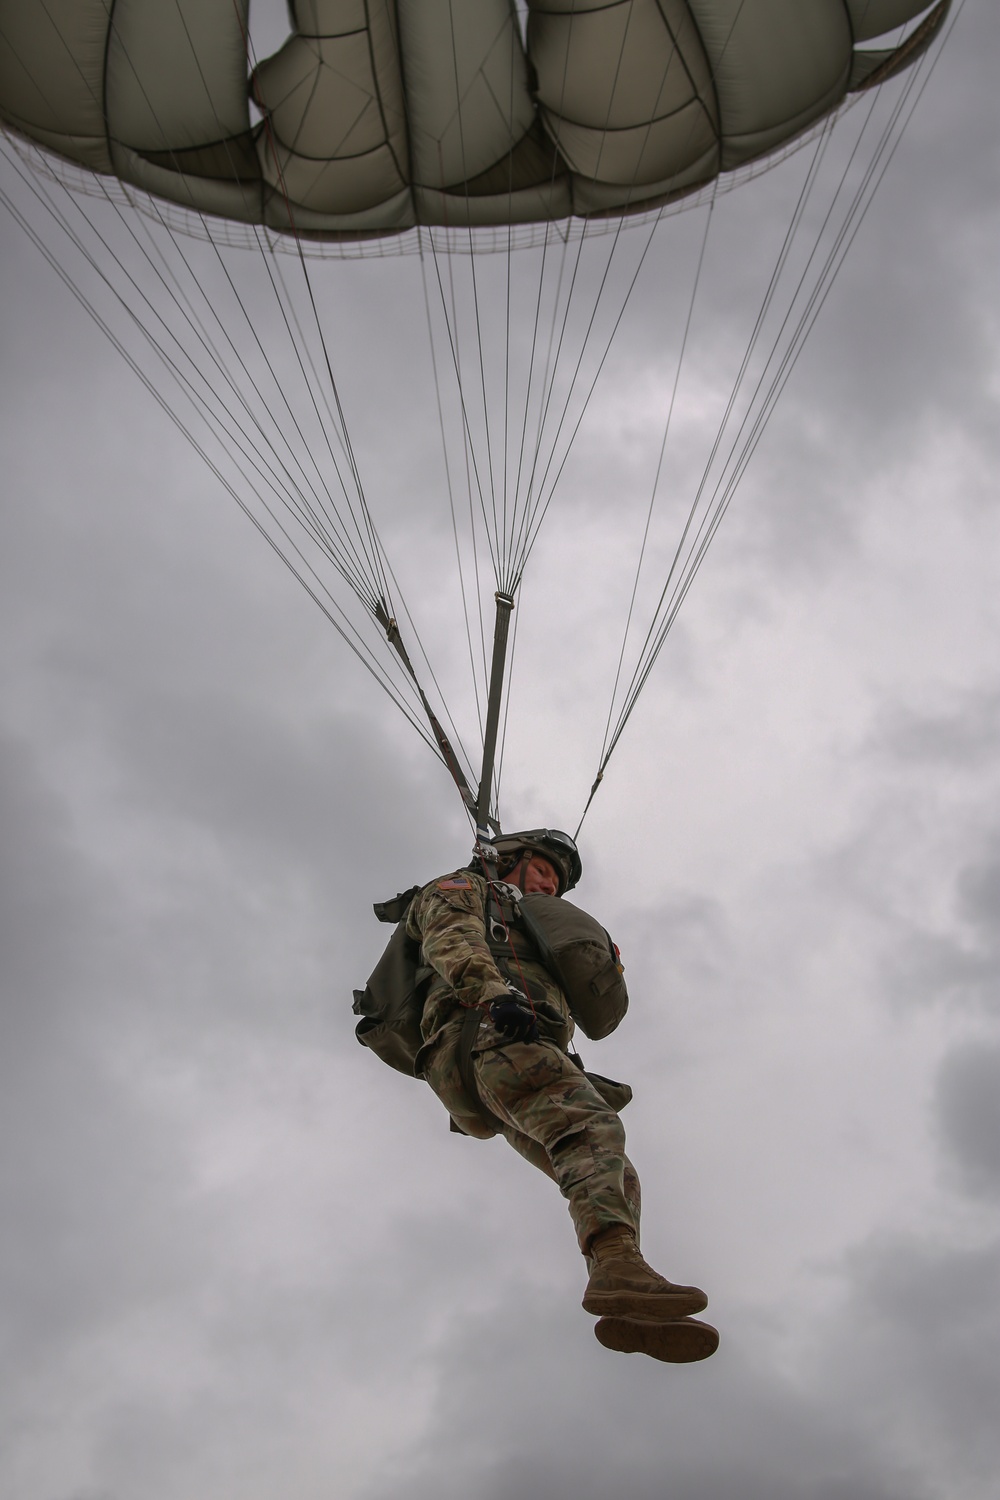 DVIDS - Images - 19th Group Paratroopers conduct static line airborne  training [Image 7 of 8]